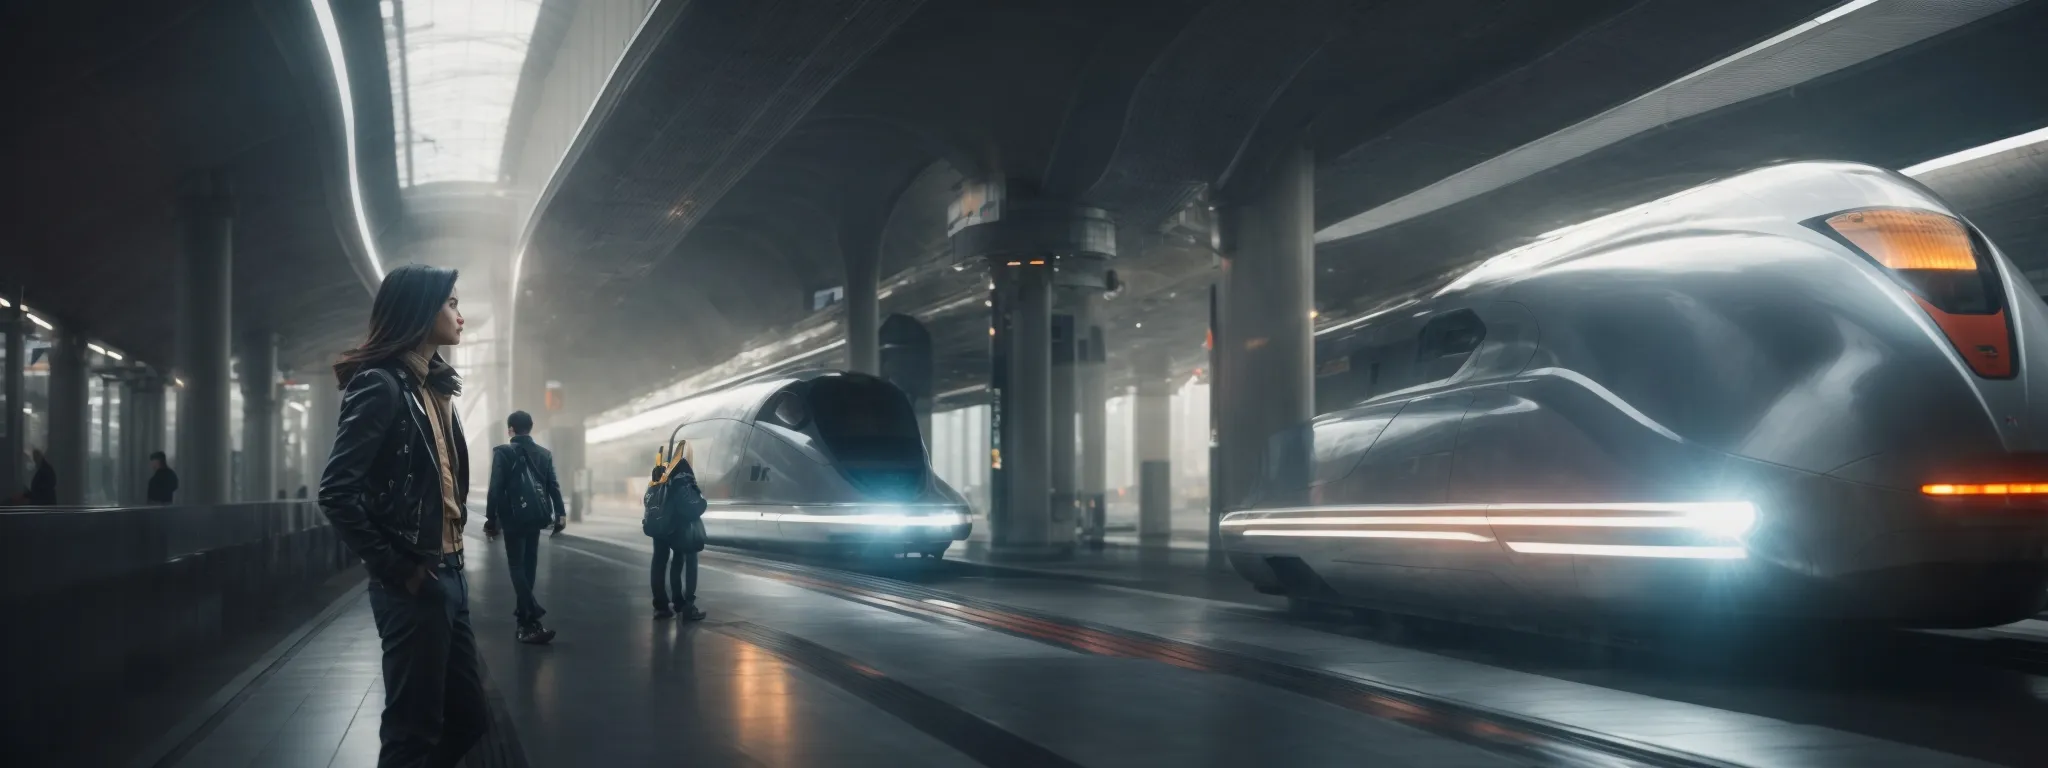 a person gazing at a streamlined, high-speed train smoothly gliding through a futuristic station, symbolizing speed and efficiency.